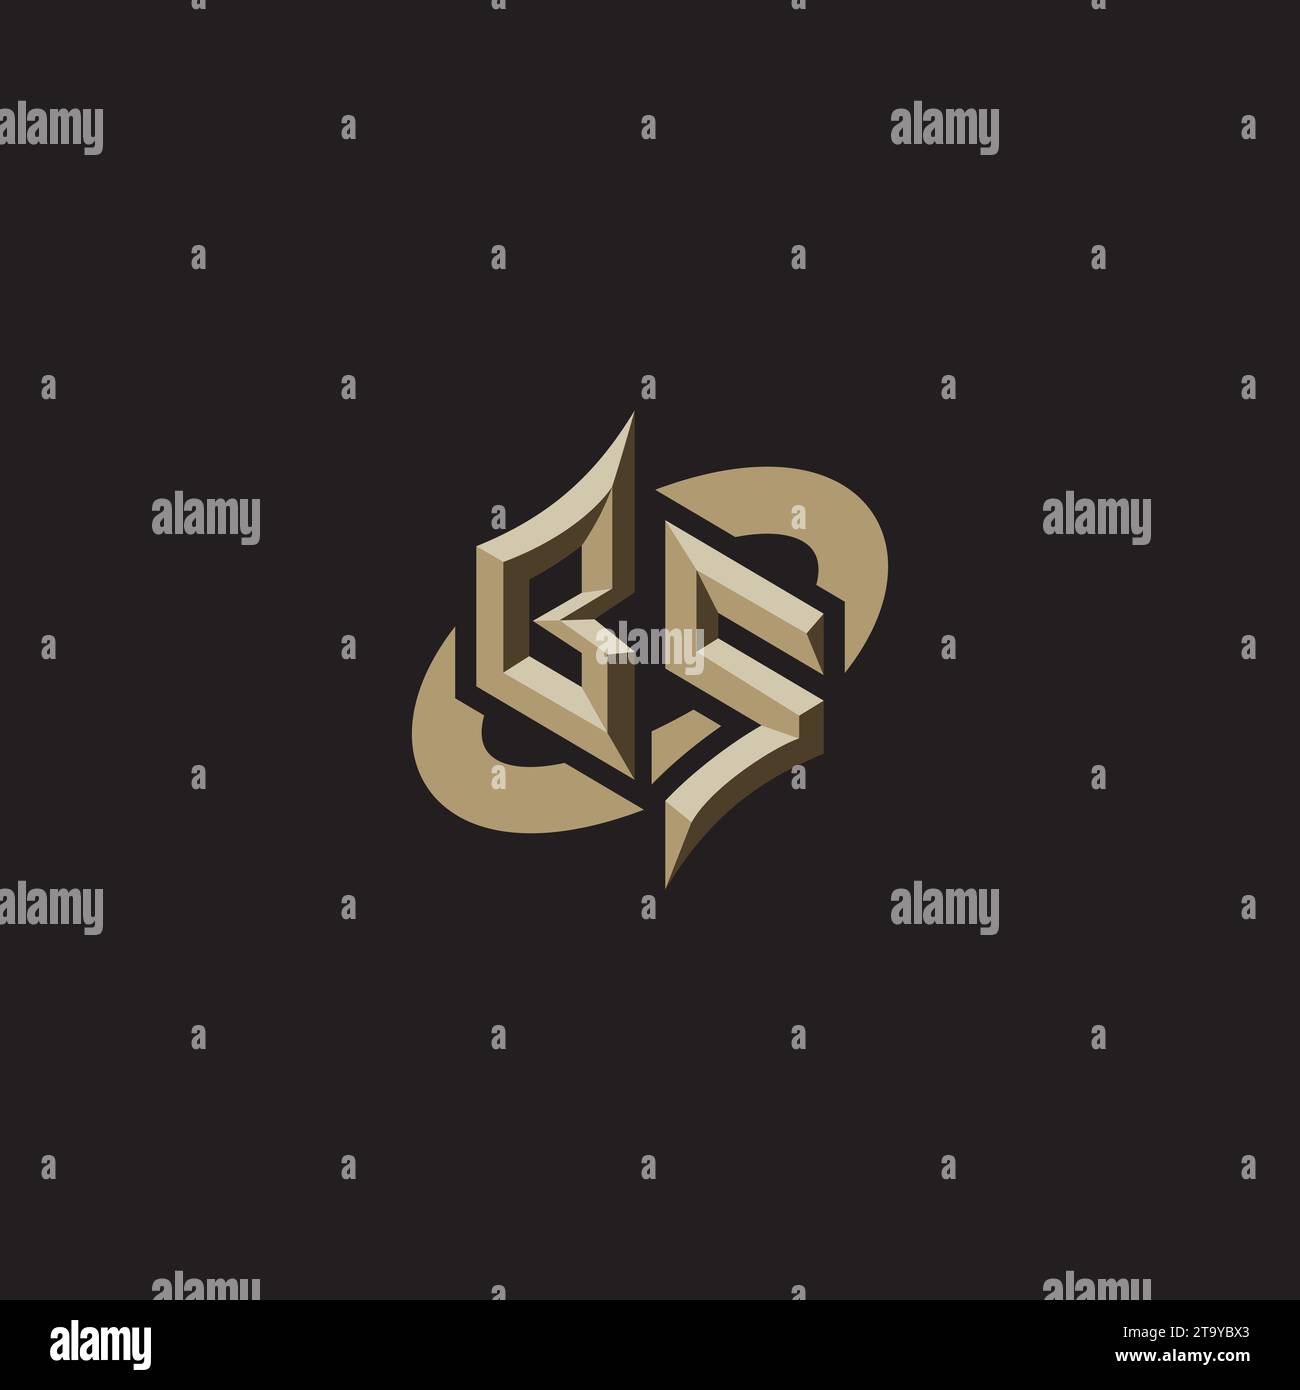 BS Premium Initial Gaming Logo designs, themes and templates for gaming, twitch and youtube Stock Vector